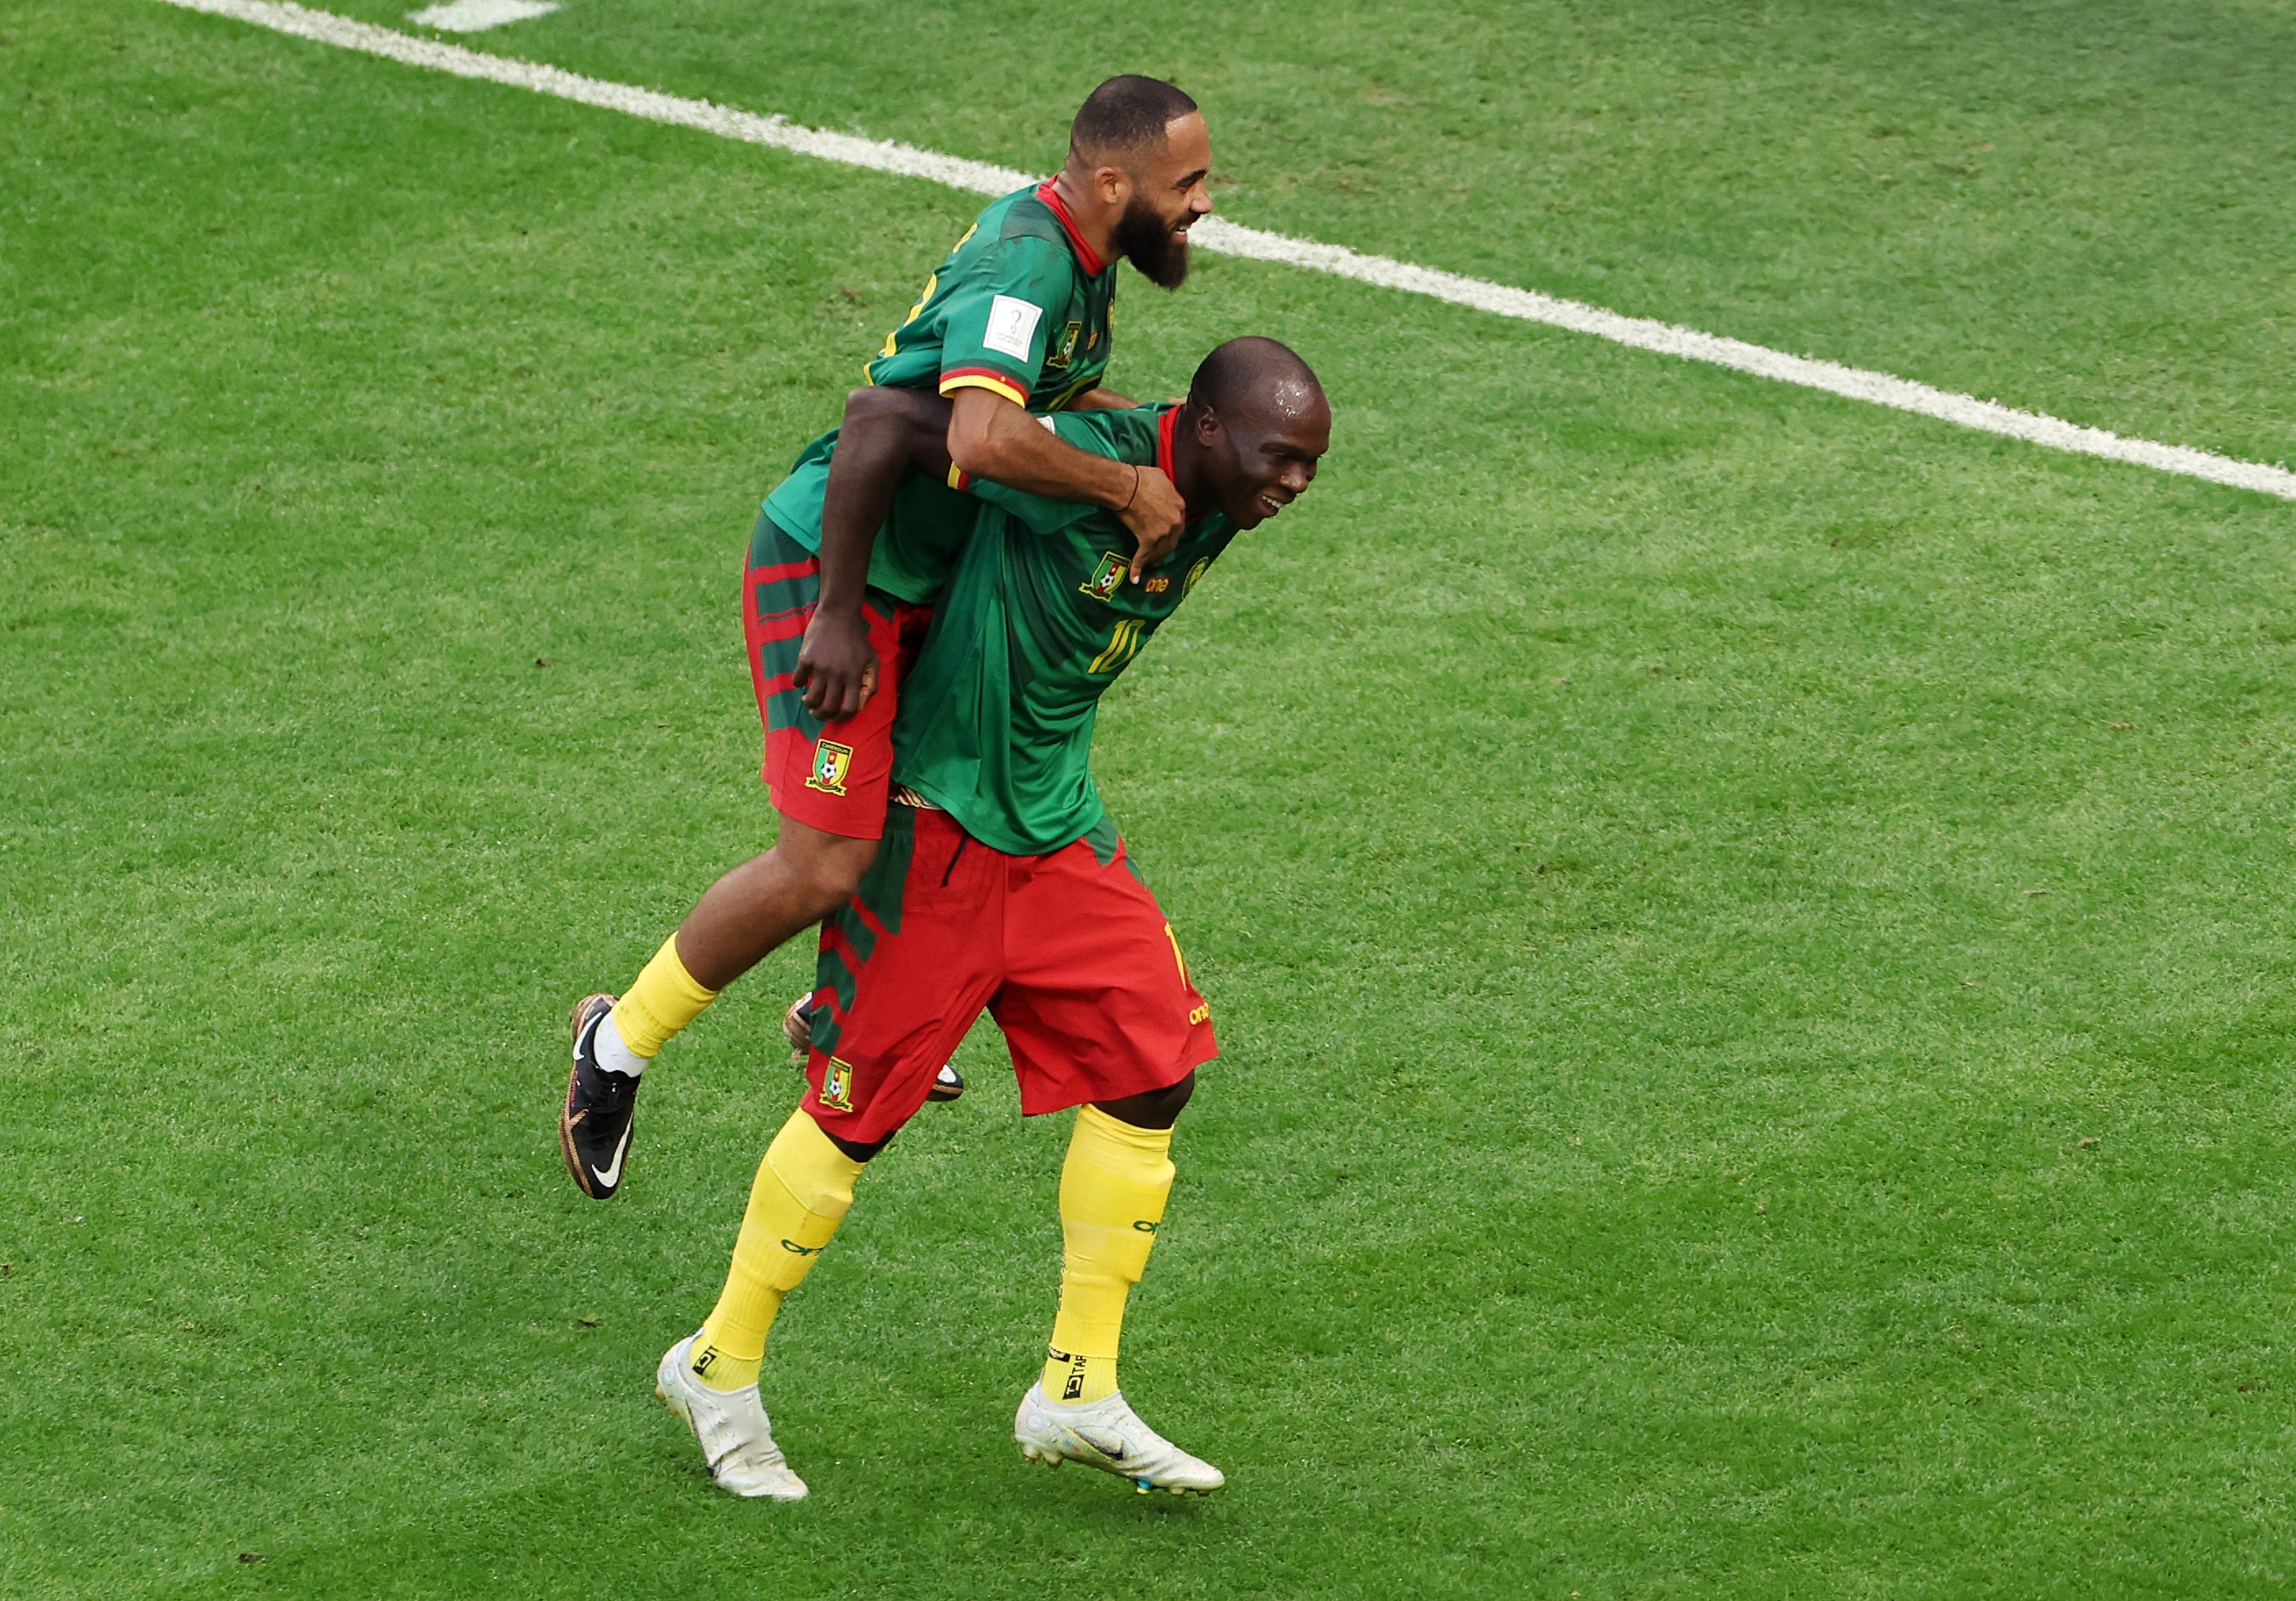 Vincent Aboubakar (right) changed the game with his goal and assist for Eric Maxim Choupo-Moting